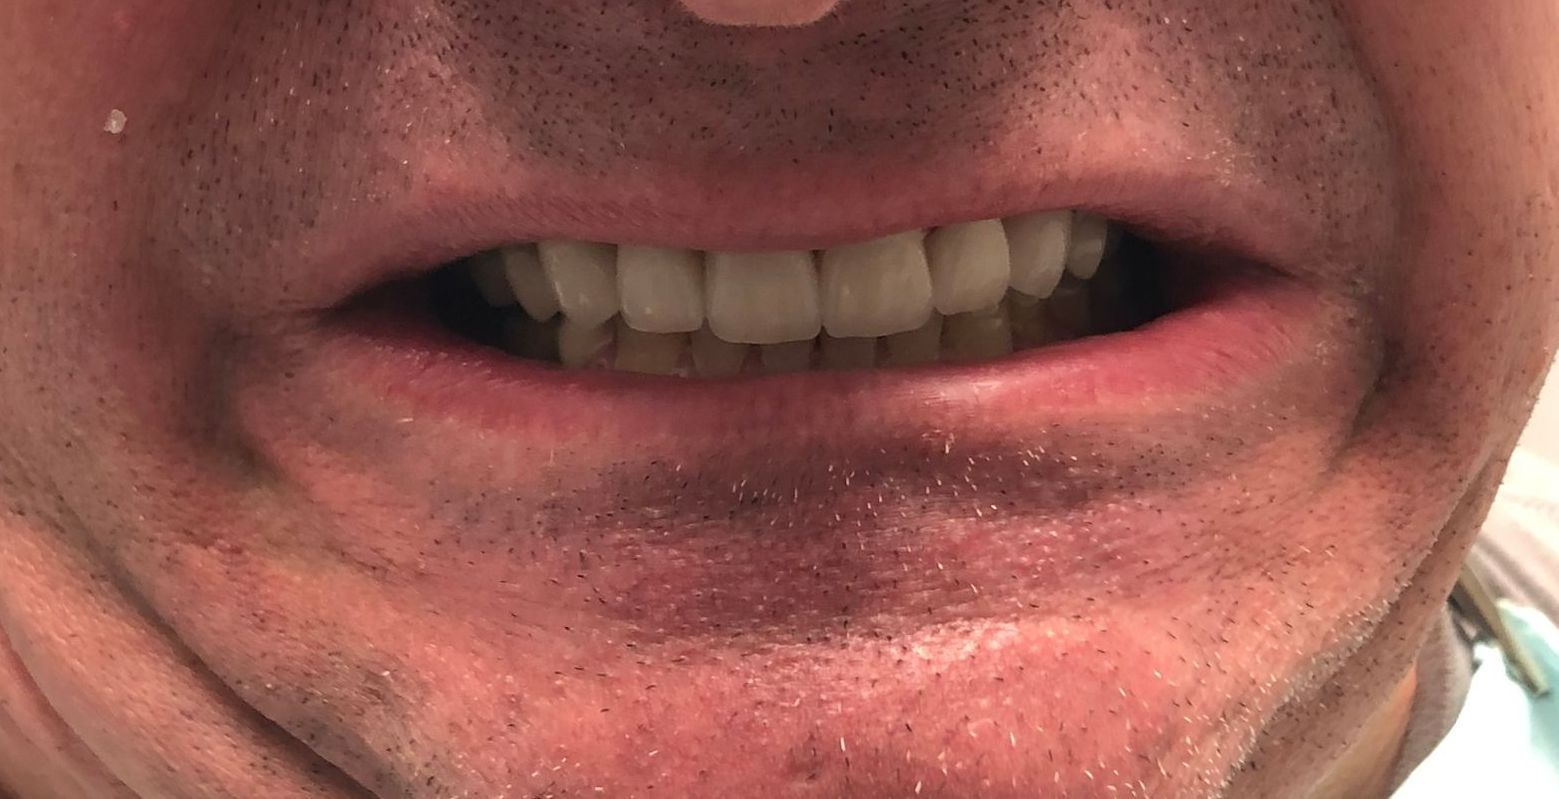 Full mouth restoration | Smile Makeover | Before and After Dental Treatment | Barclay Family Dental | Best Dentist For Family Dentistry, Dental Implants, and Cosmetic Dentistry in Cherry Hill, NJ